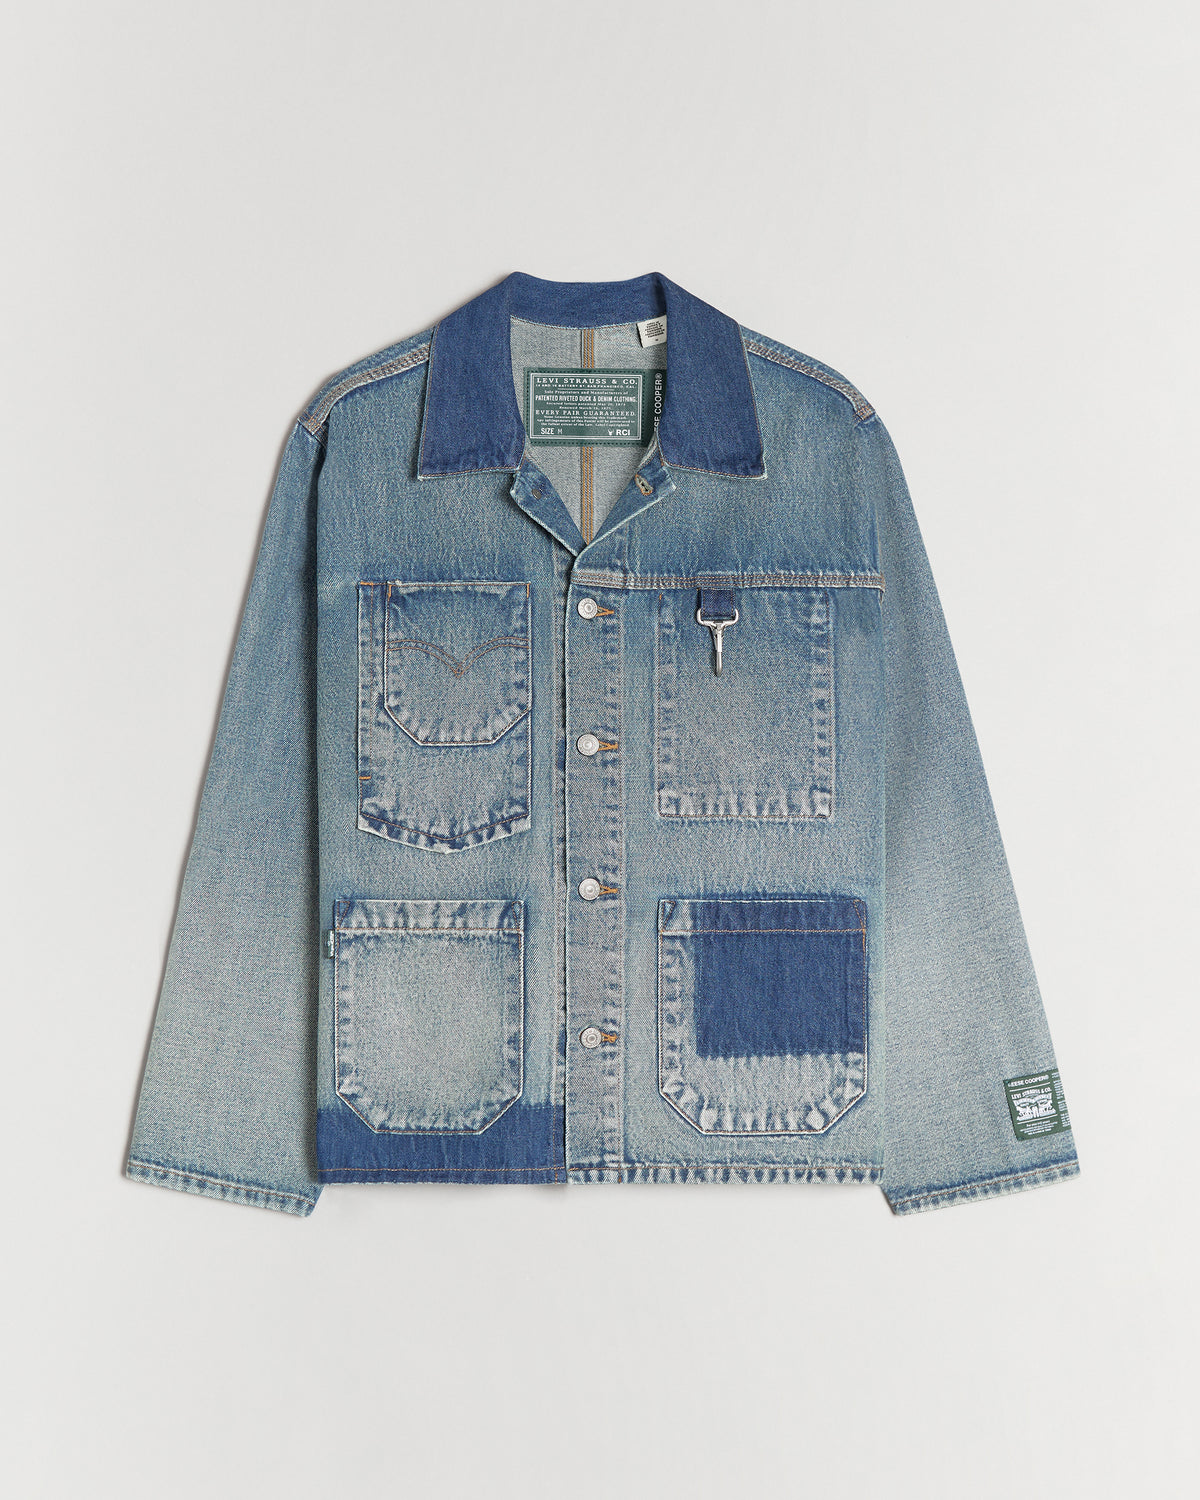 Available Now: RC x Levi's Collection